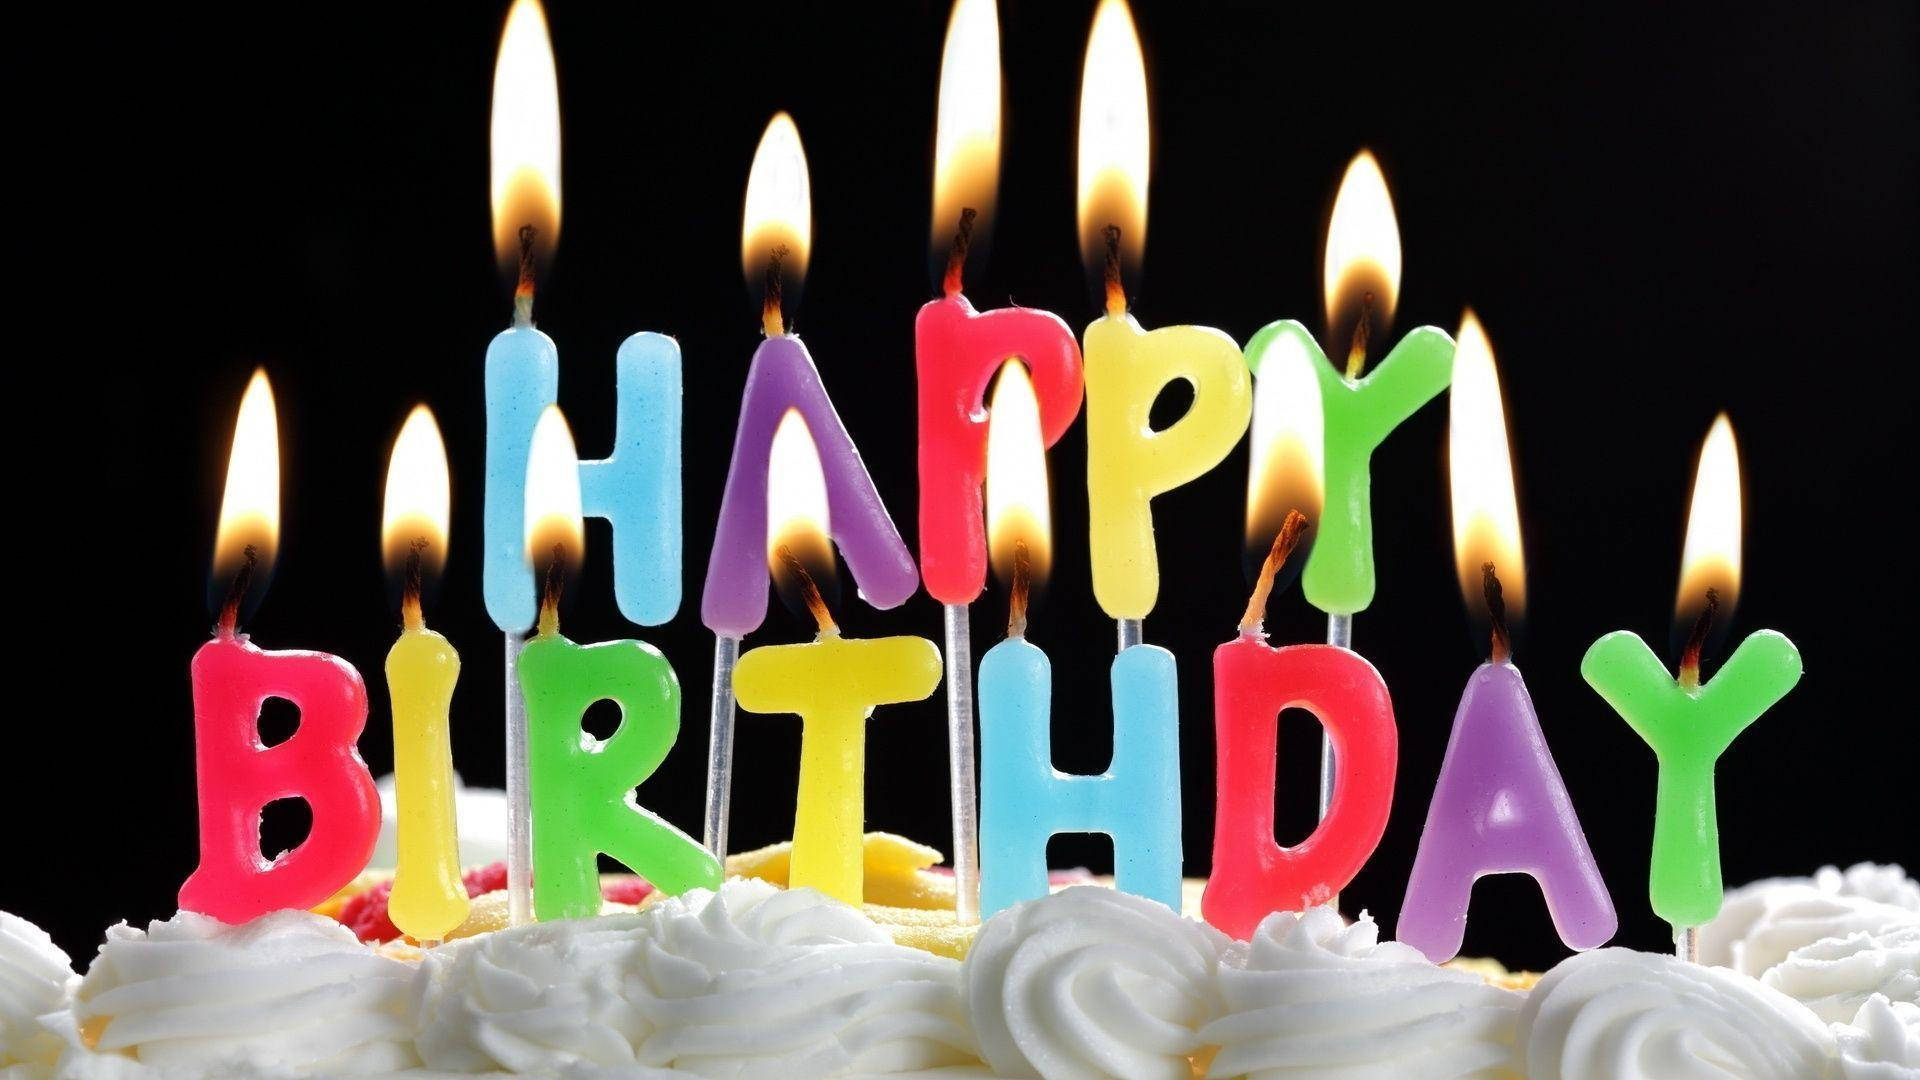 Happy Birthday Candles Colorful Background Wallpaper